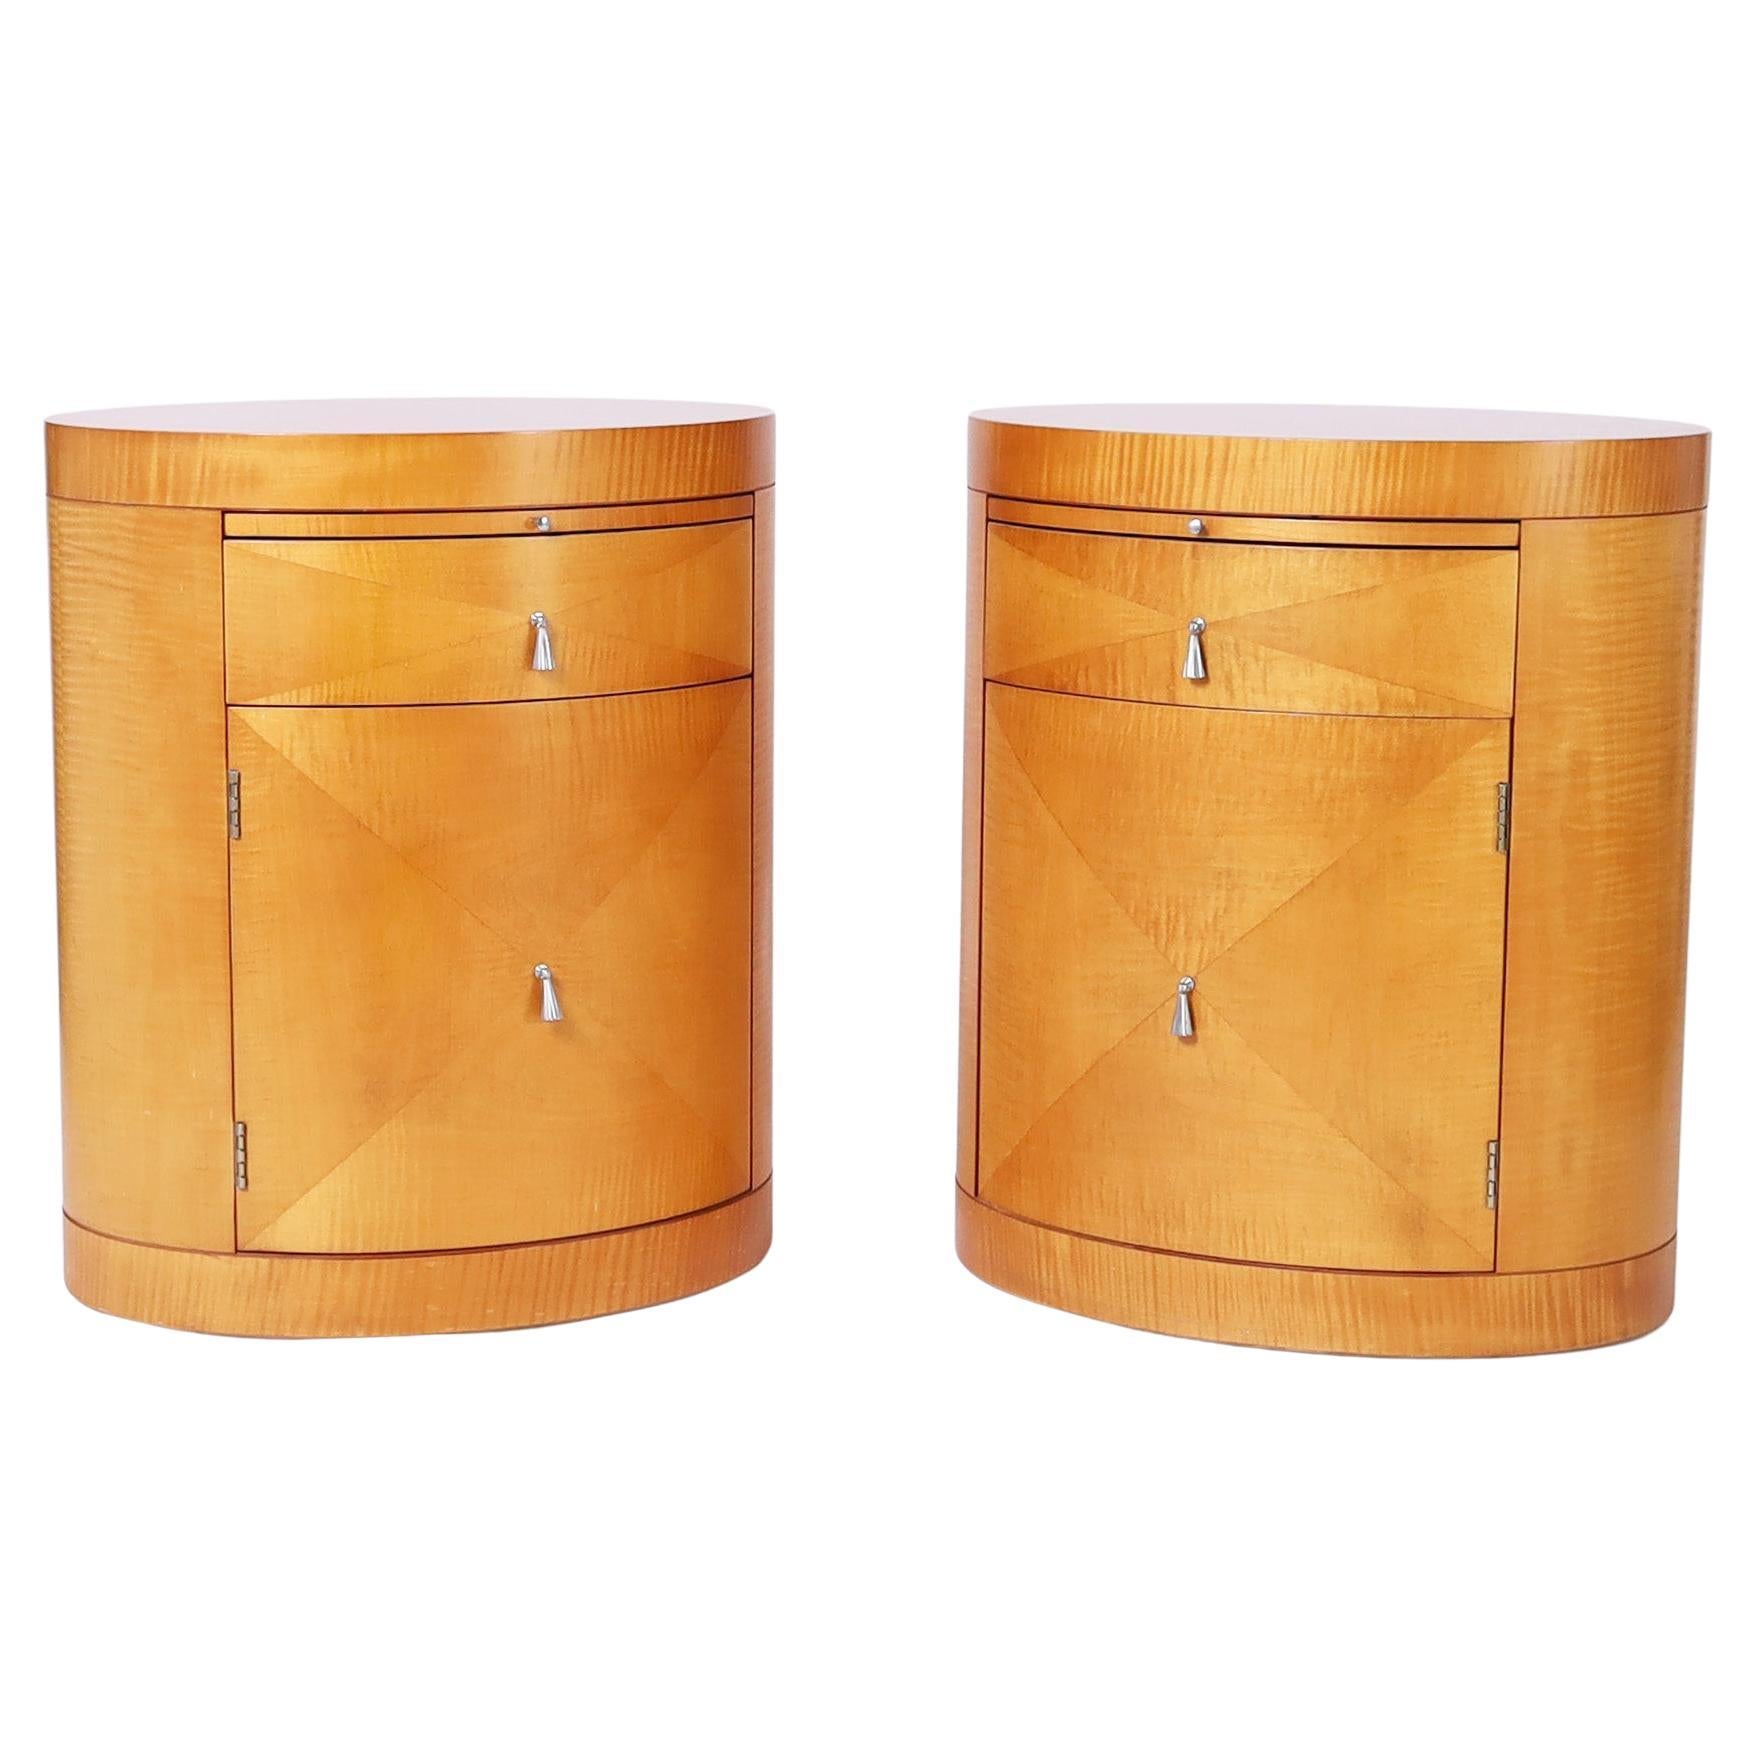 Baker Pair of Art Deco Style Drum Form Stands